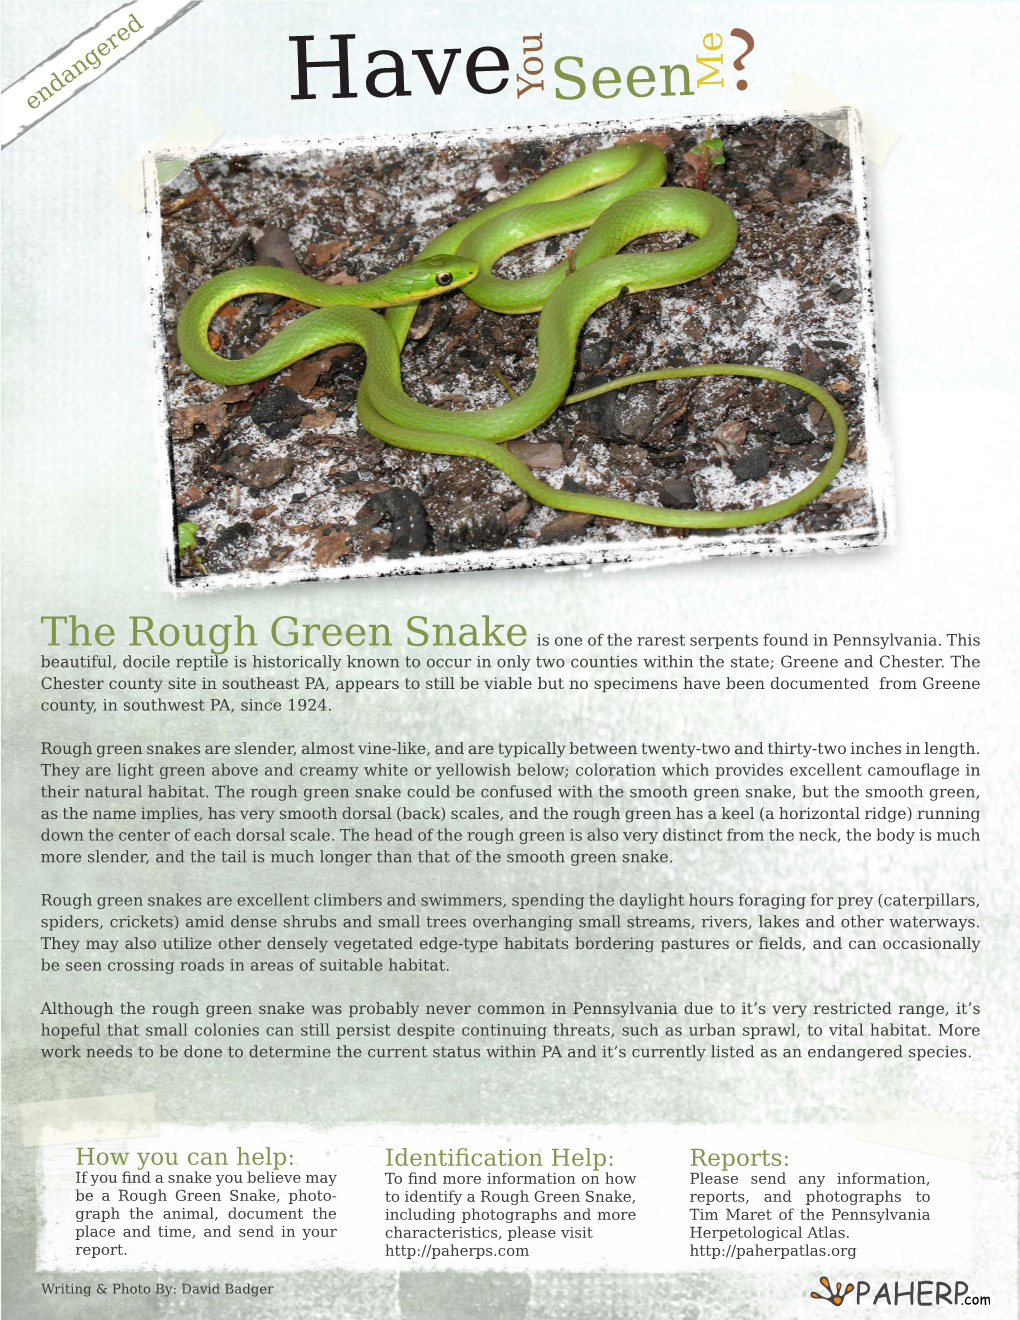 Rough Green Snake Is One of the Rarest Serpents Found in Pennsylvania